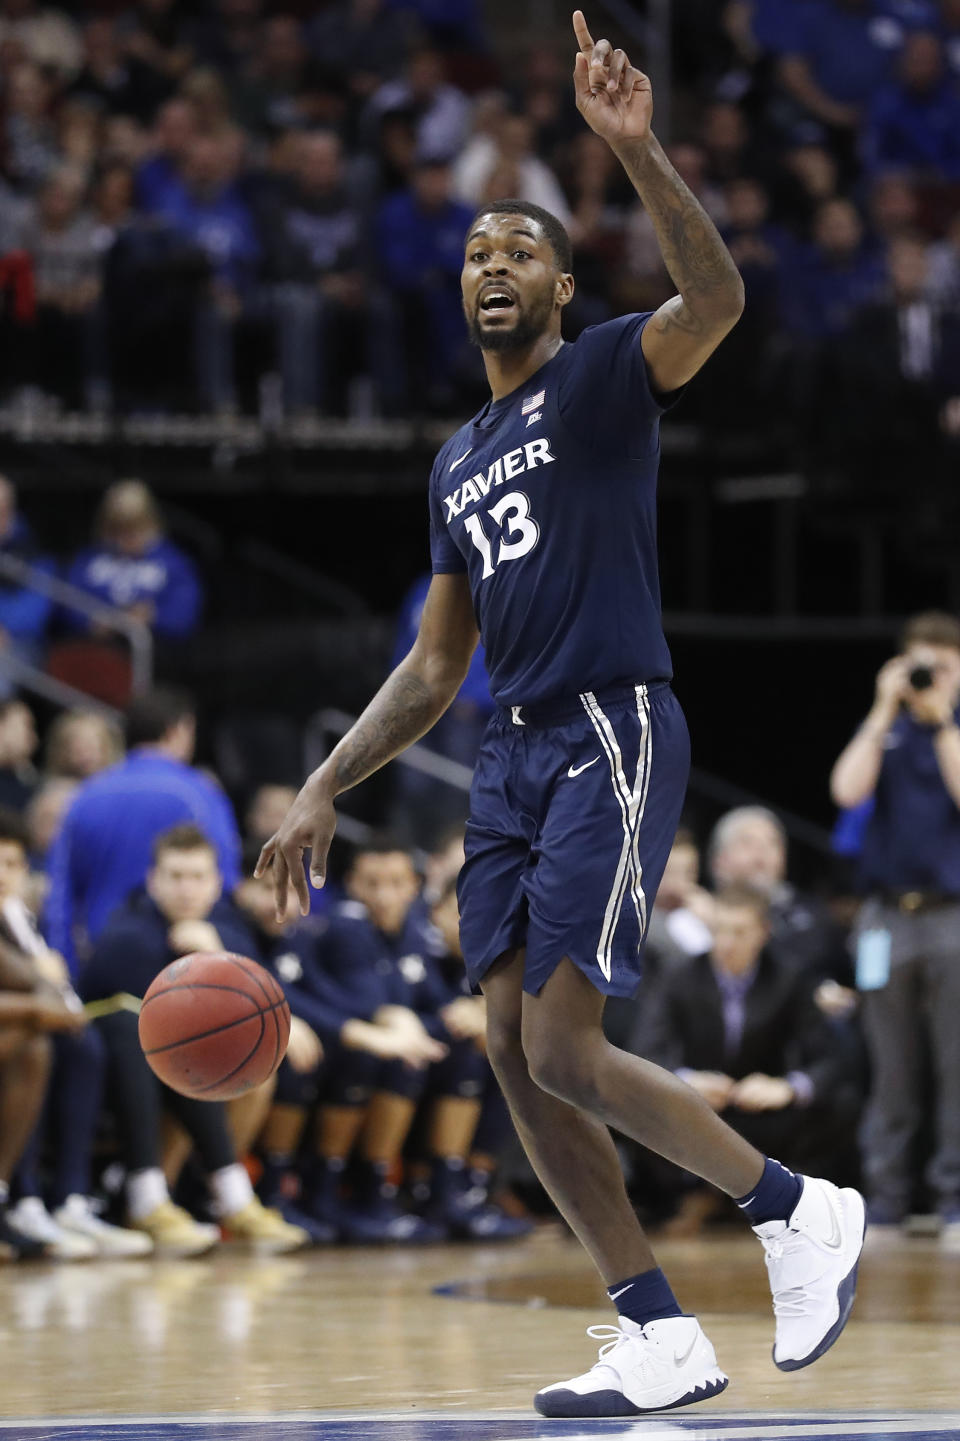 Xavier's Naji Marshall dribbles down the court against Seton Hall during the first half of an NCAA college basketball game, Saturday, feb. 1, 2020, in Newark, N.J. (AP Photo/Michael Owens)